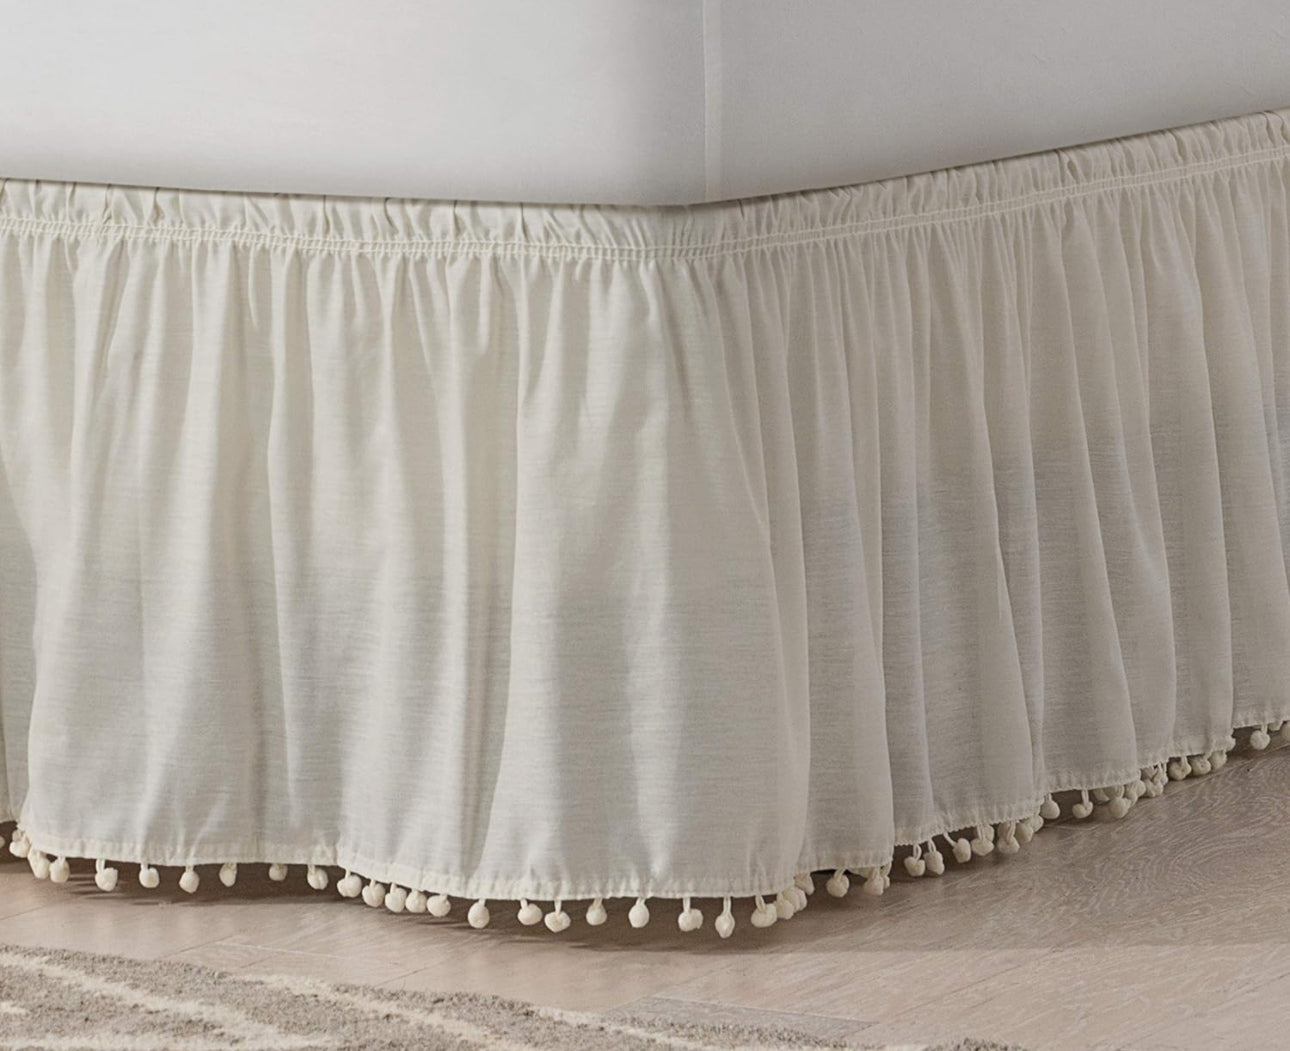 Easy FIT Pom Pom Elastic Wrap Around Bed Skirt, Easy On/Off Dust Ruffle (18 Inch Drop), Queen/King, Ivory